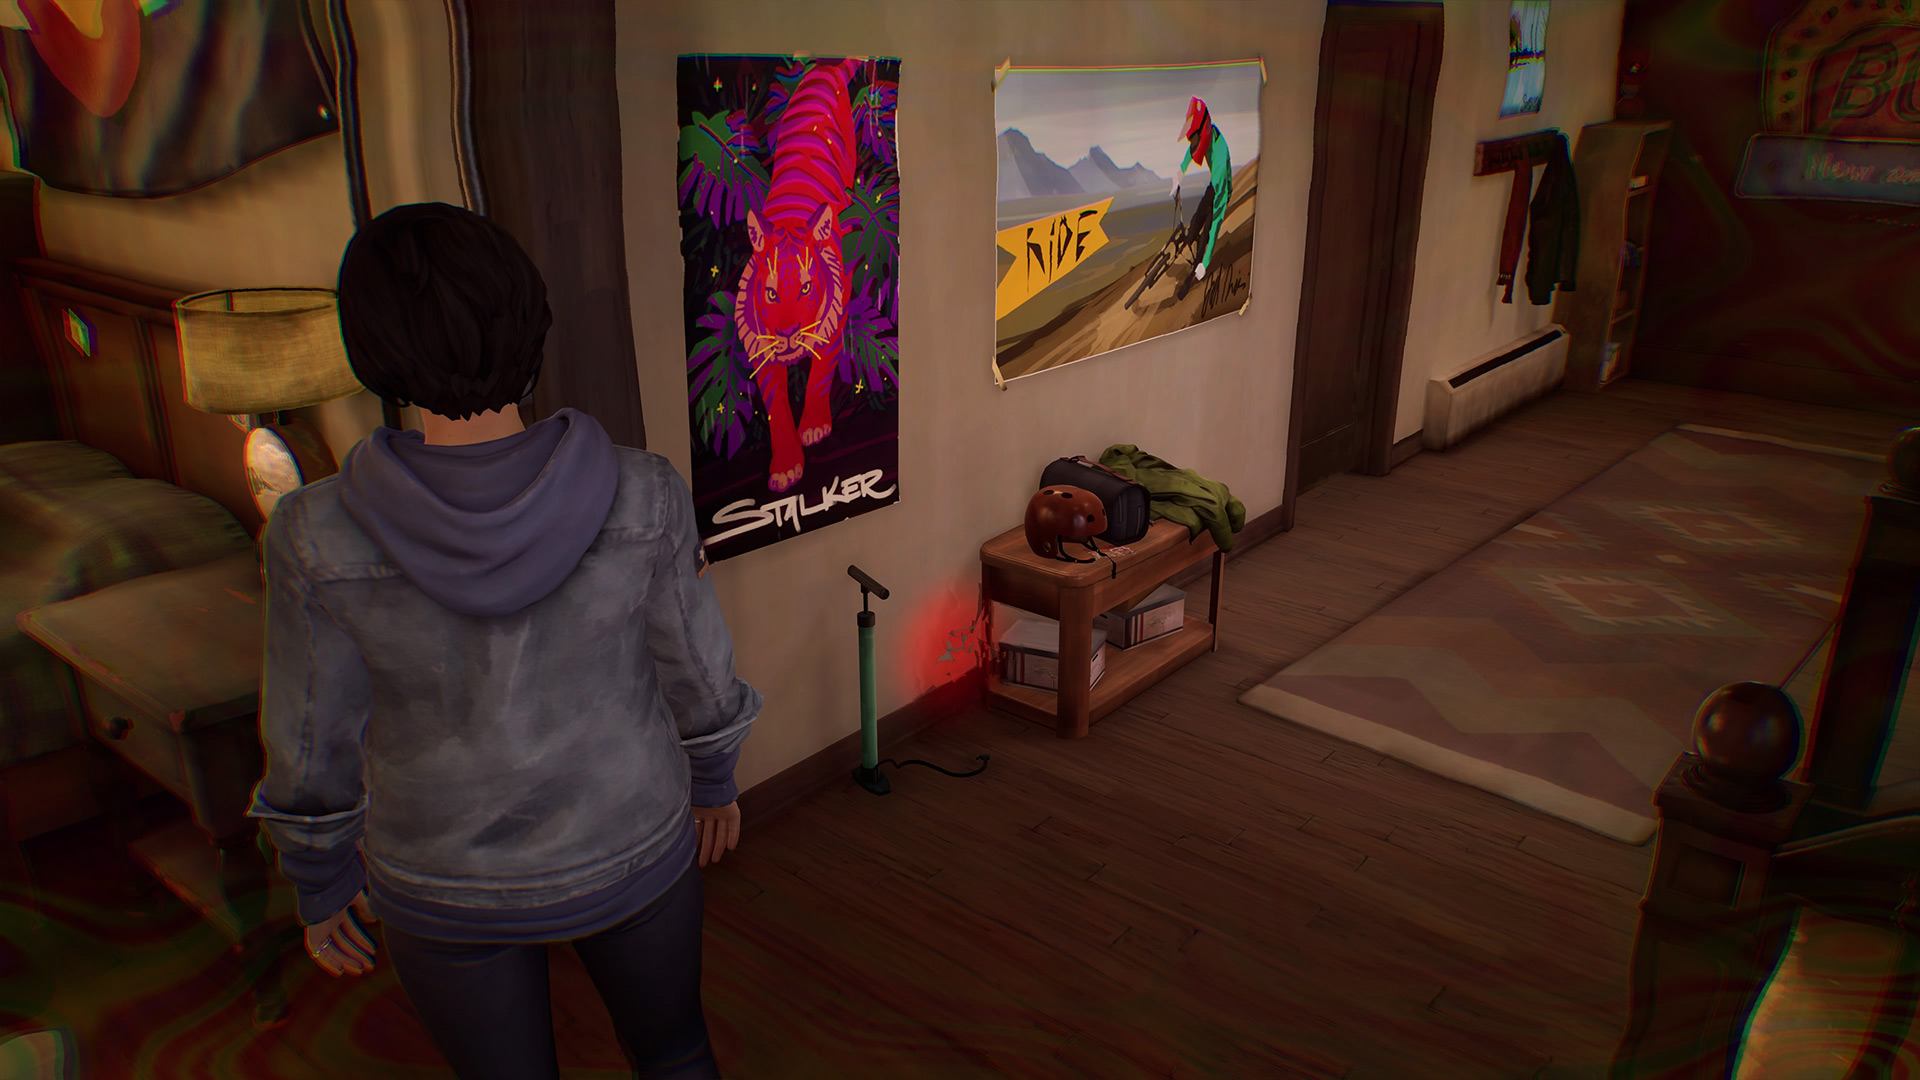 Life is Strange True Colors memory locations: Alex looking at posters on the wall, including a colorful tiger poster.